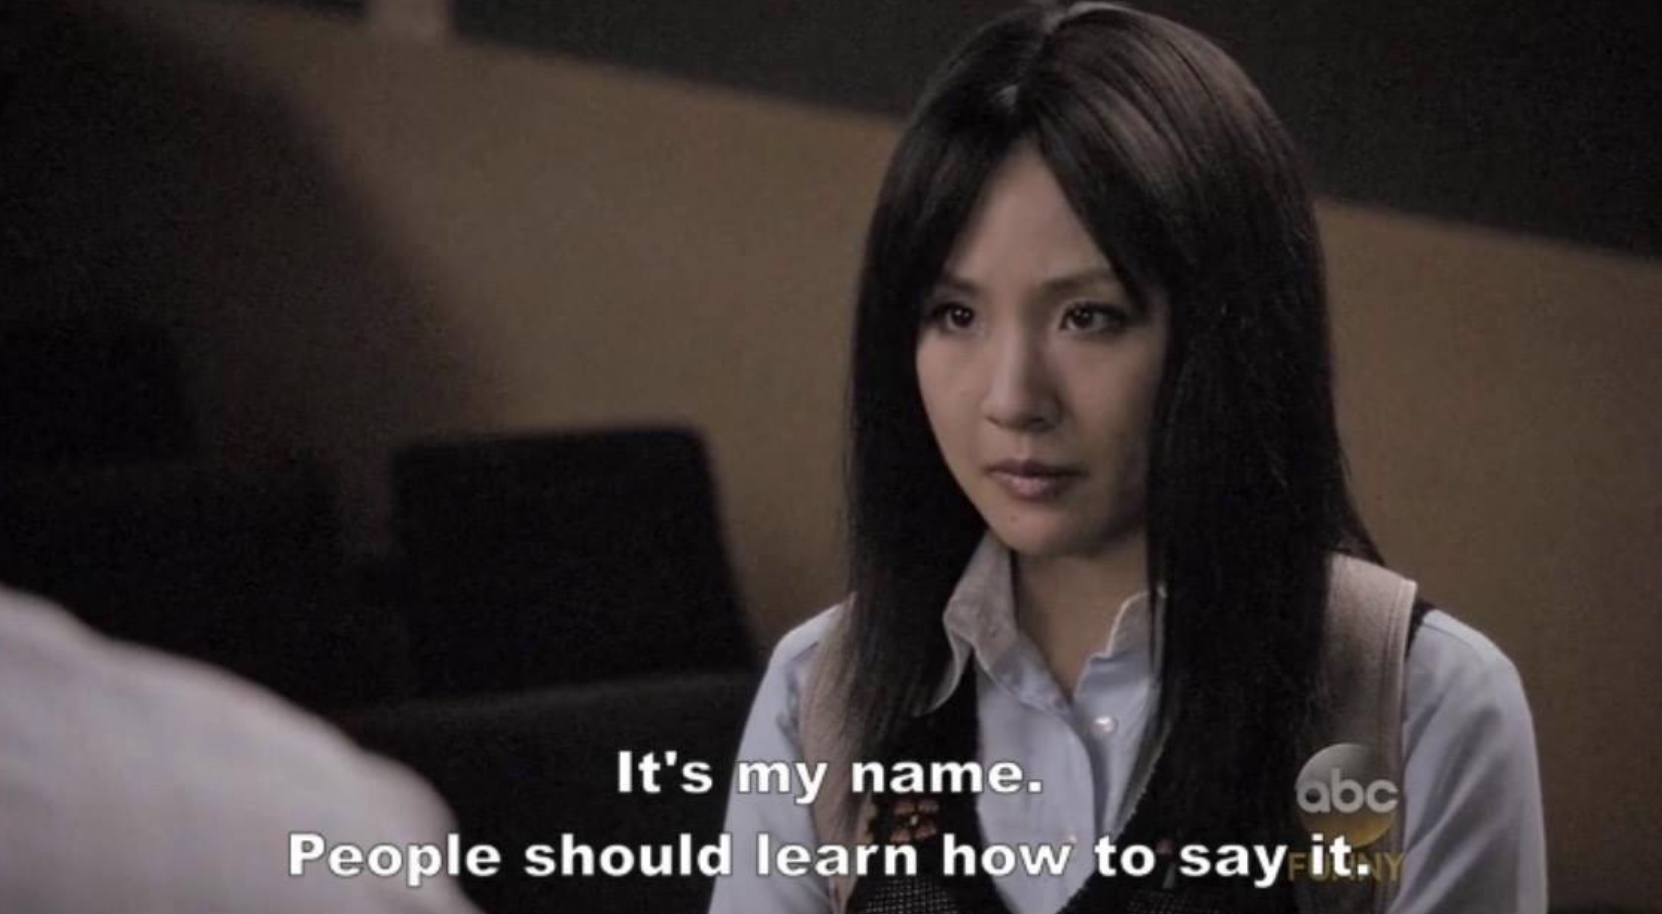 Jessica on difficult asian names